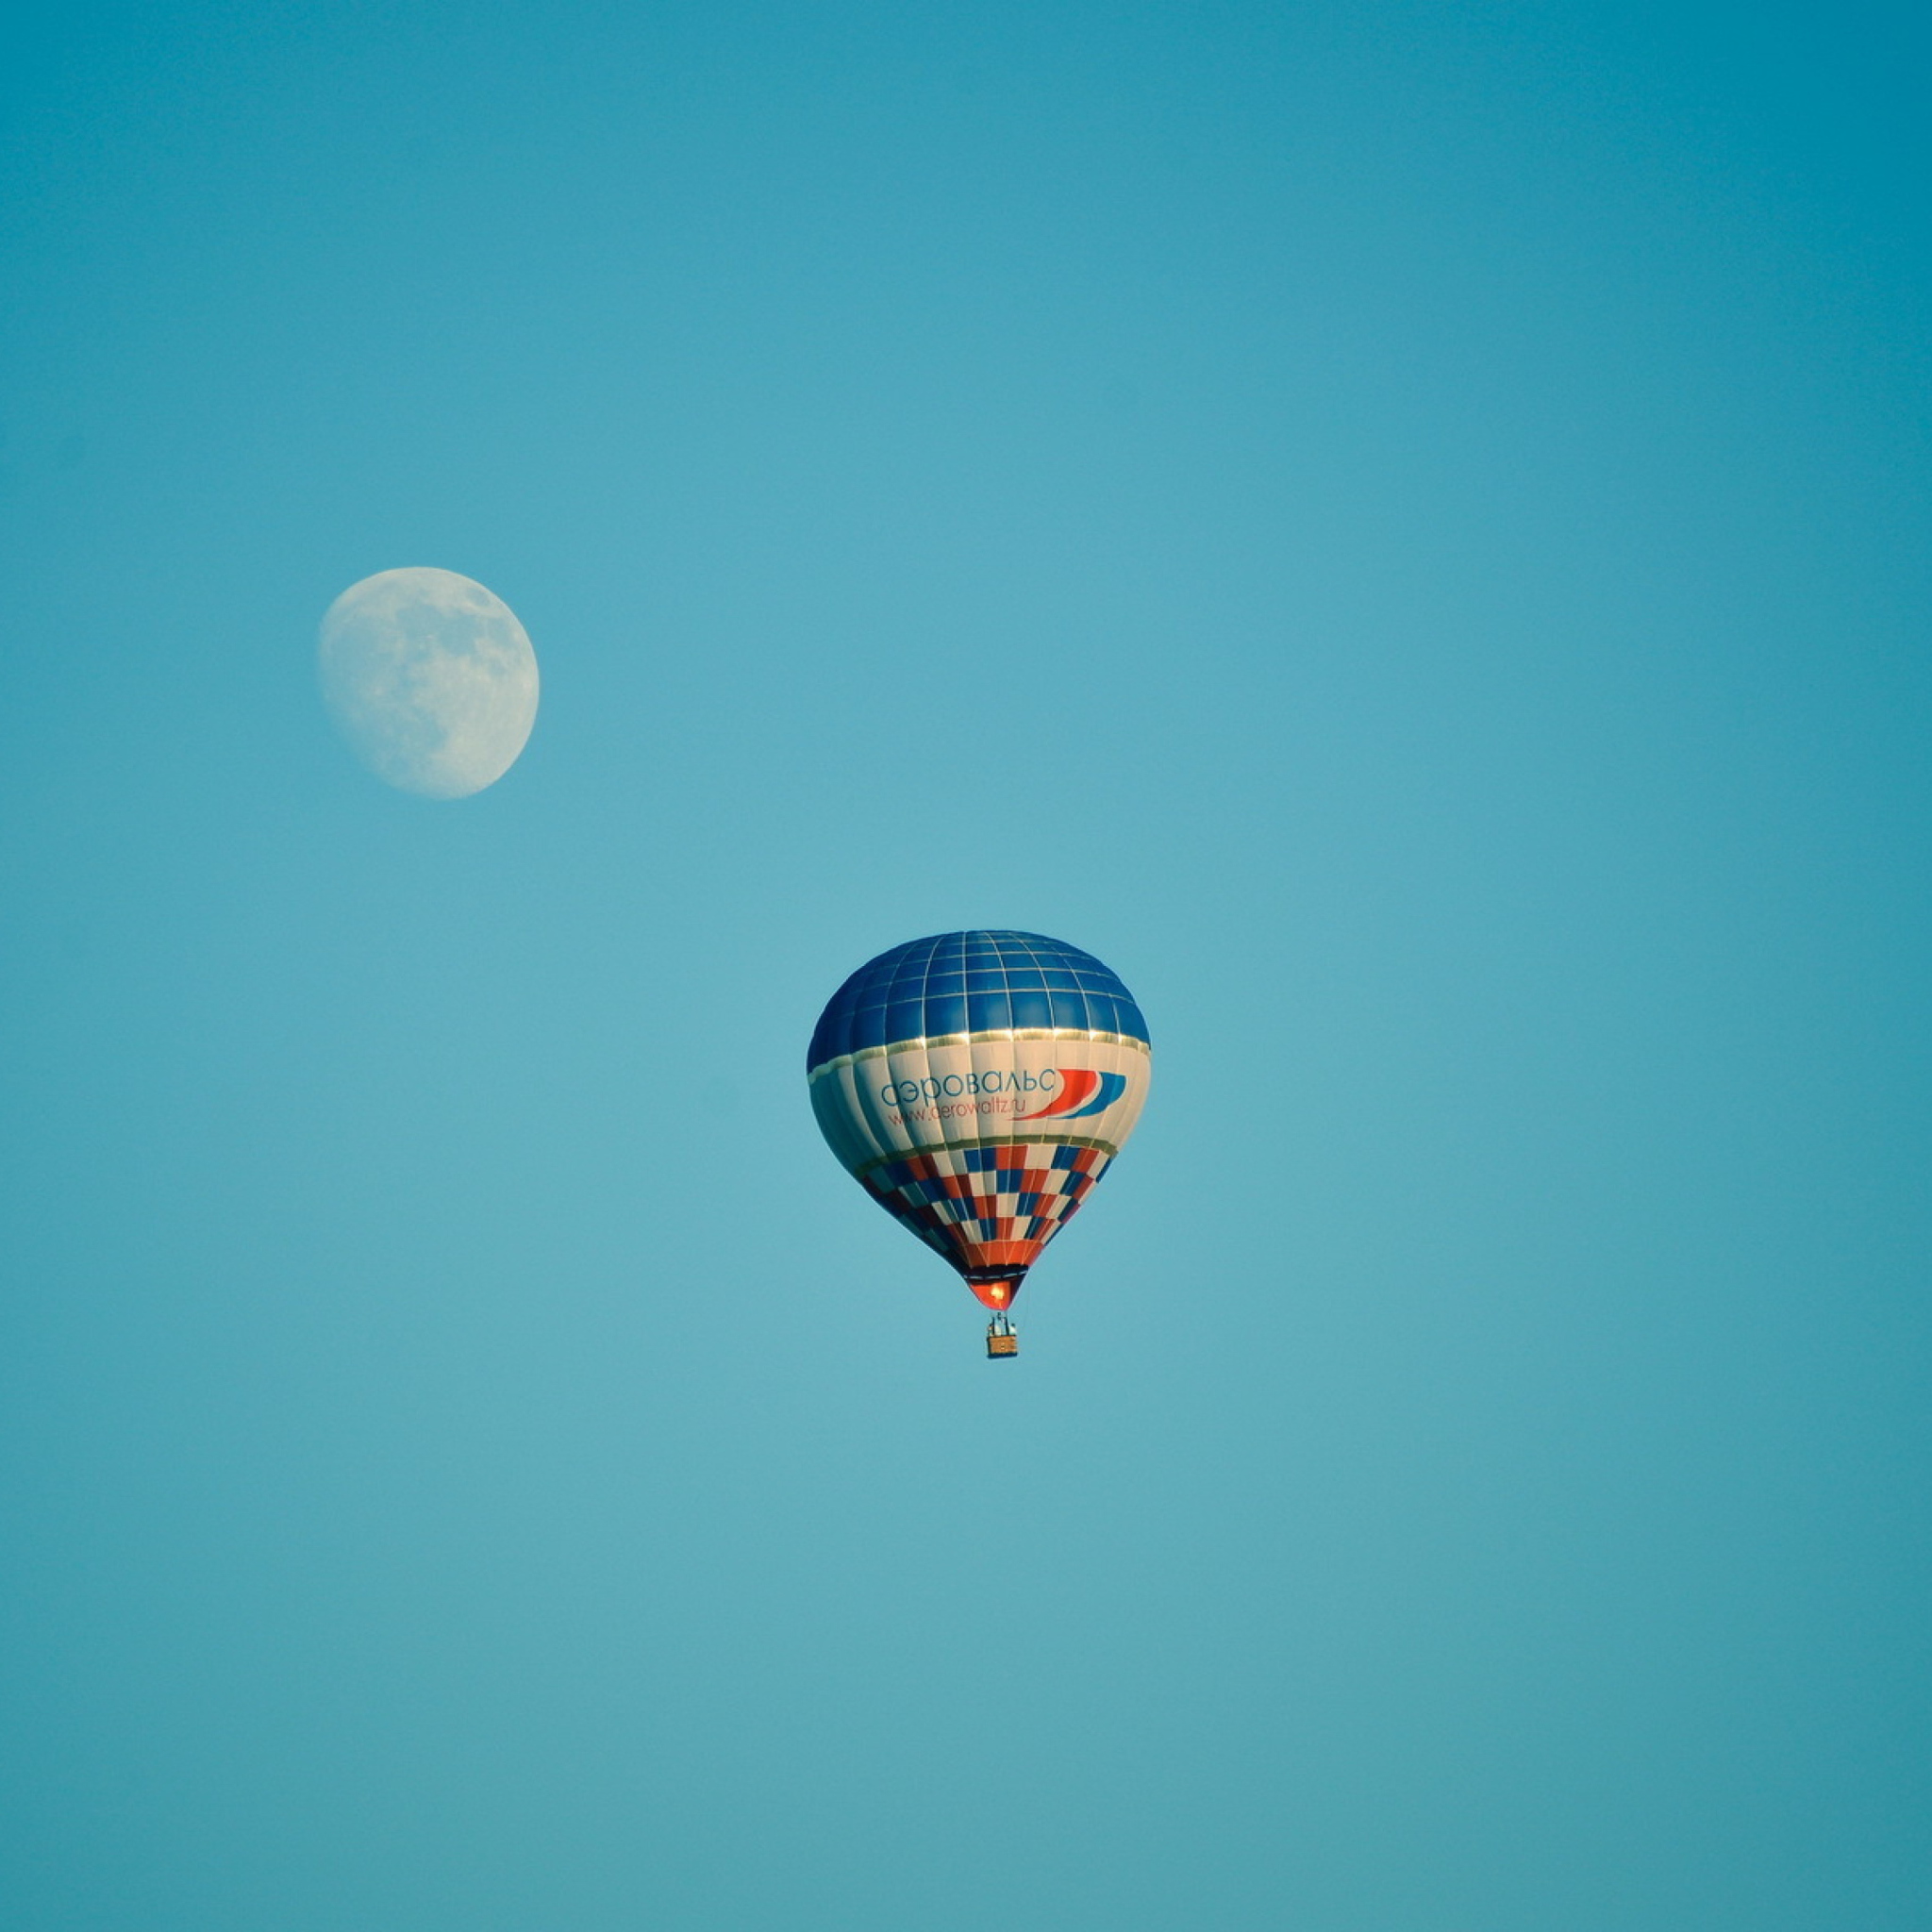 Air Balloon In Blue Sky In Front Of White Moon wallpaper 2048x2048